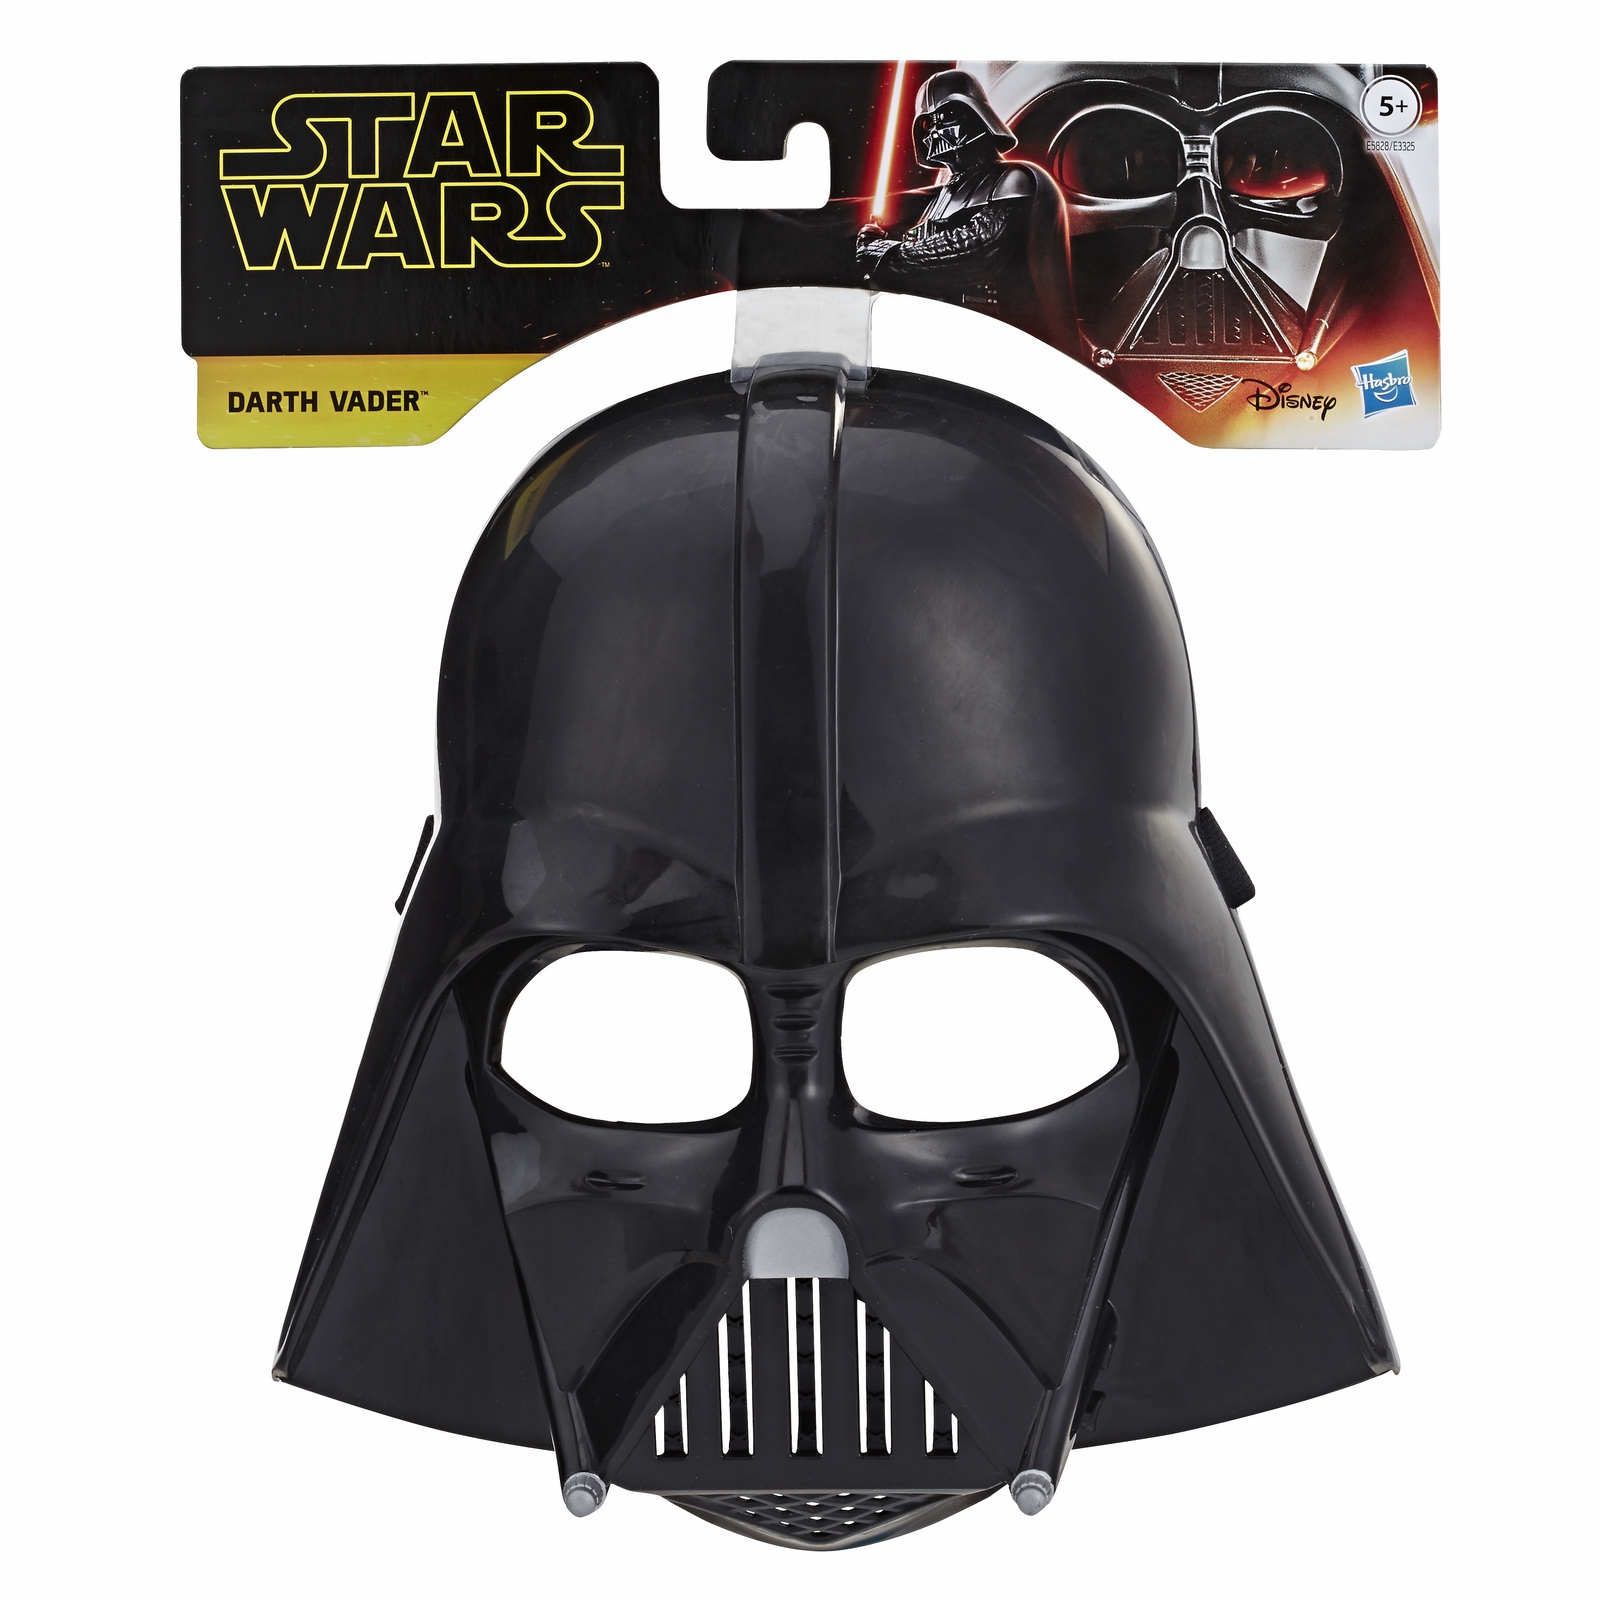 STAR WARS ROLE-PLAY MASK Assortment - in pck (Darth Vader).jpg